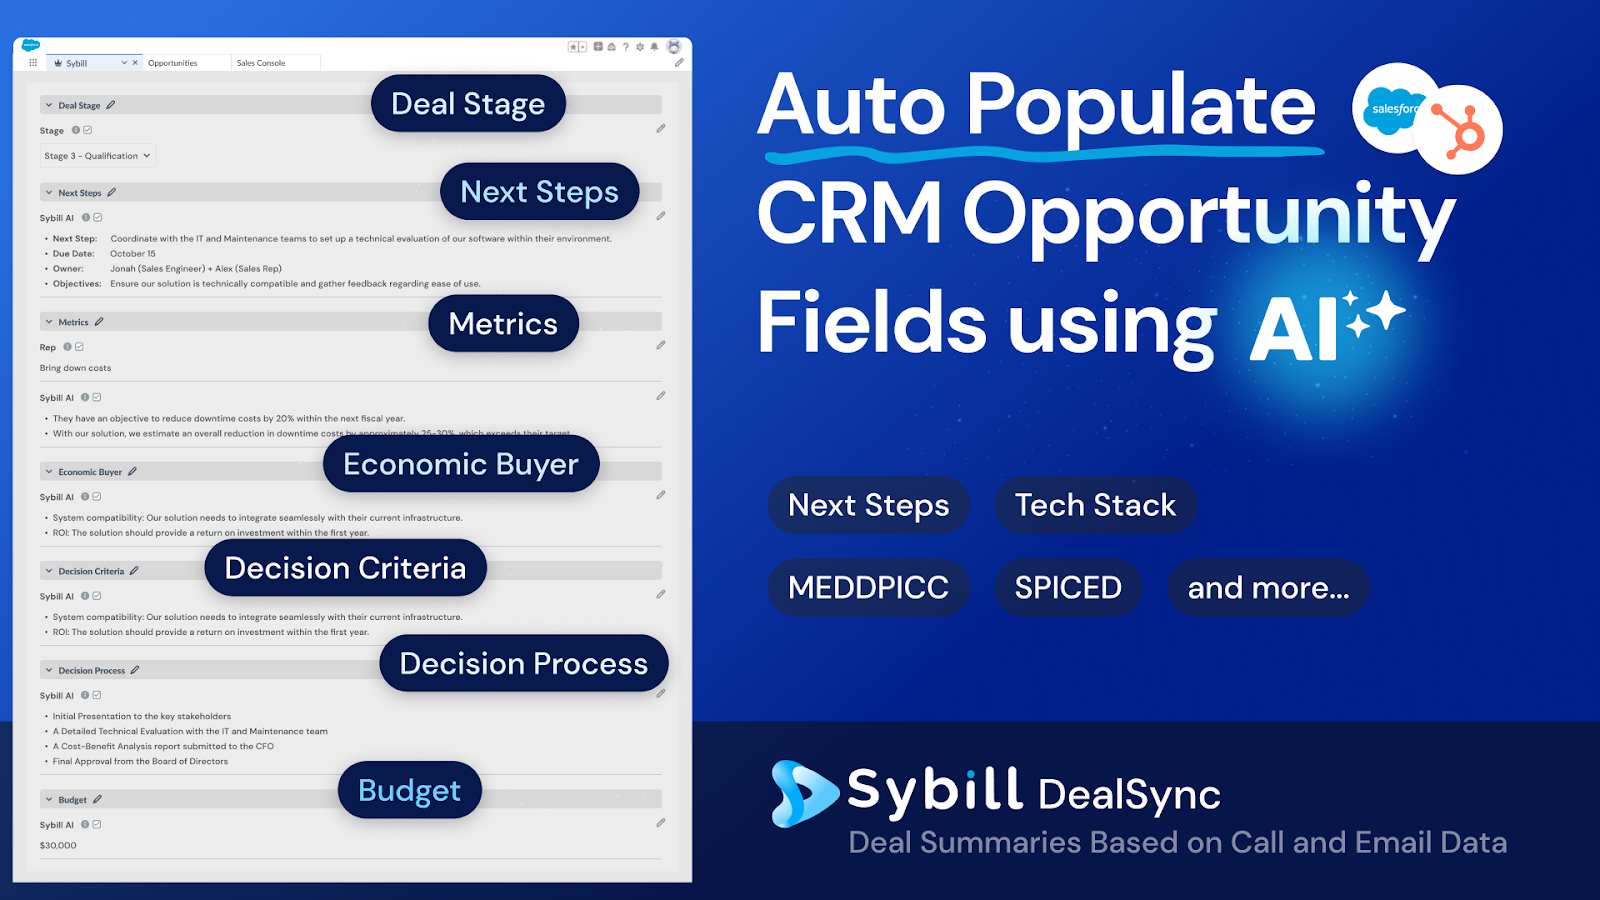 DealSync CRM Automation: Everything you need to know and remember about deals, automatically updated on CRM. So you can focus on what matters: meaningful action to close deals